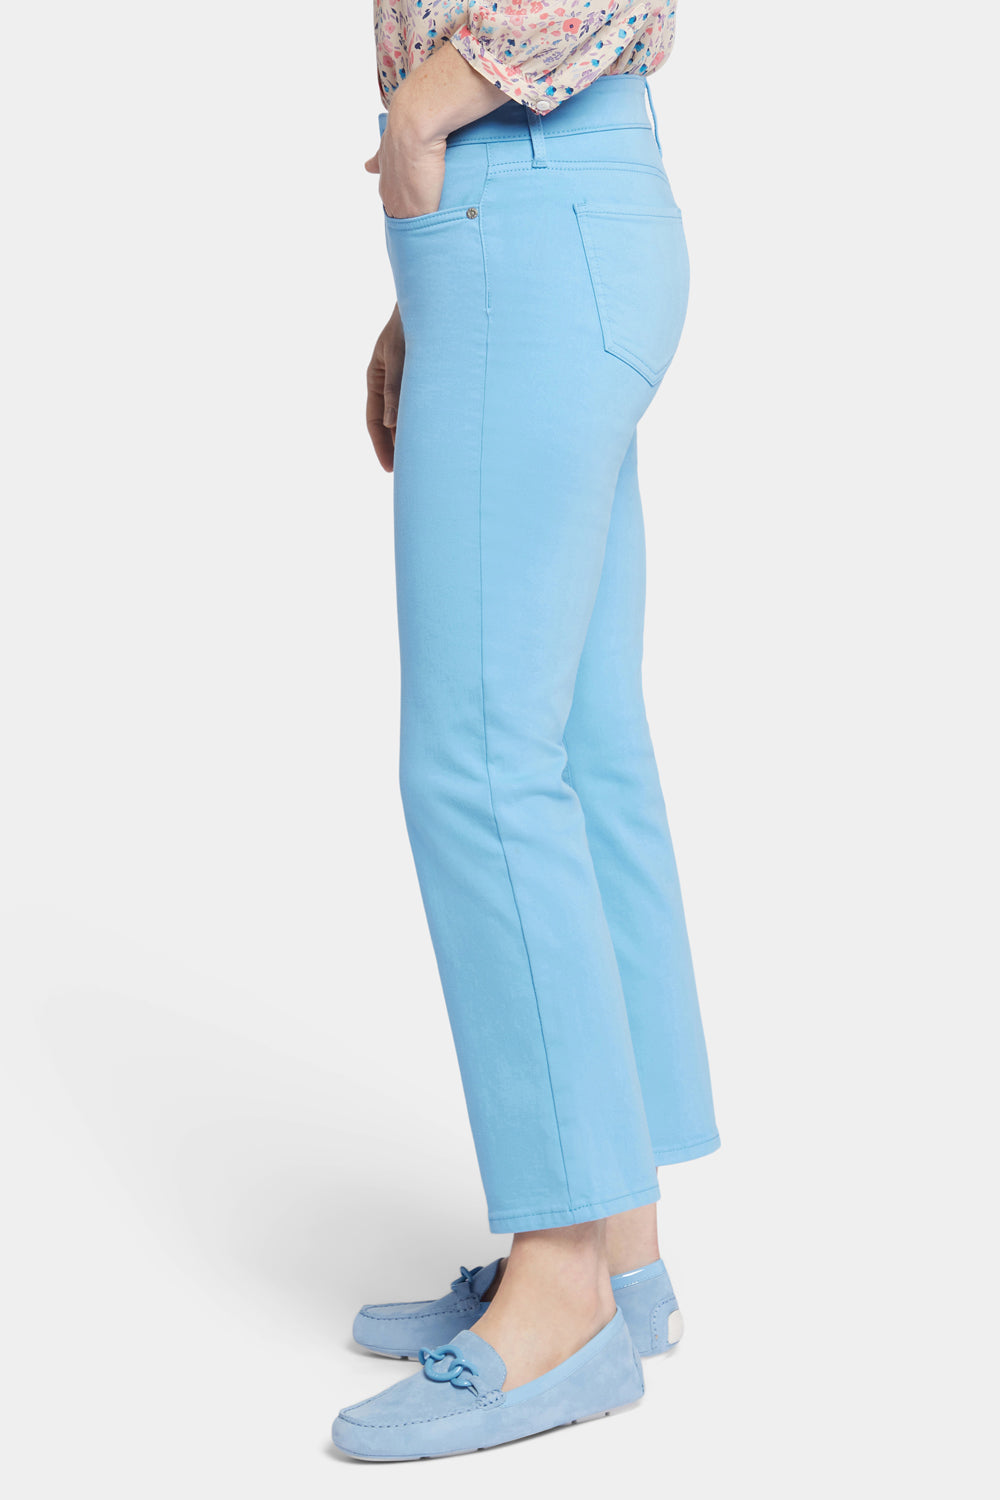 NYDJ Marilyn Straight Ankle Jeans  - Bluebell